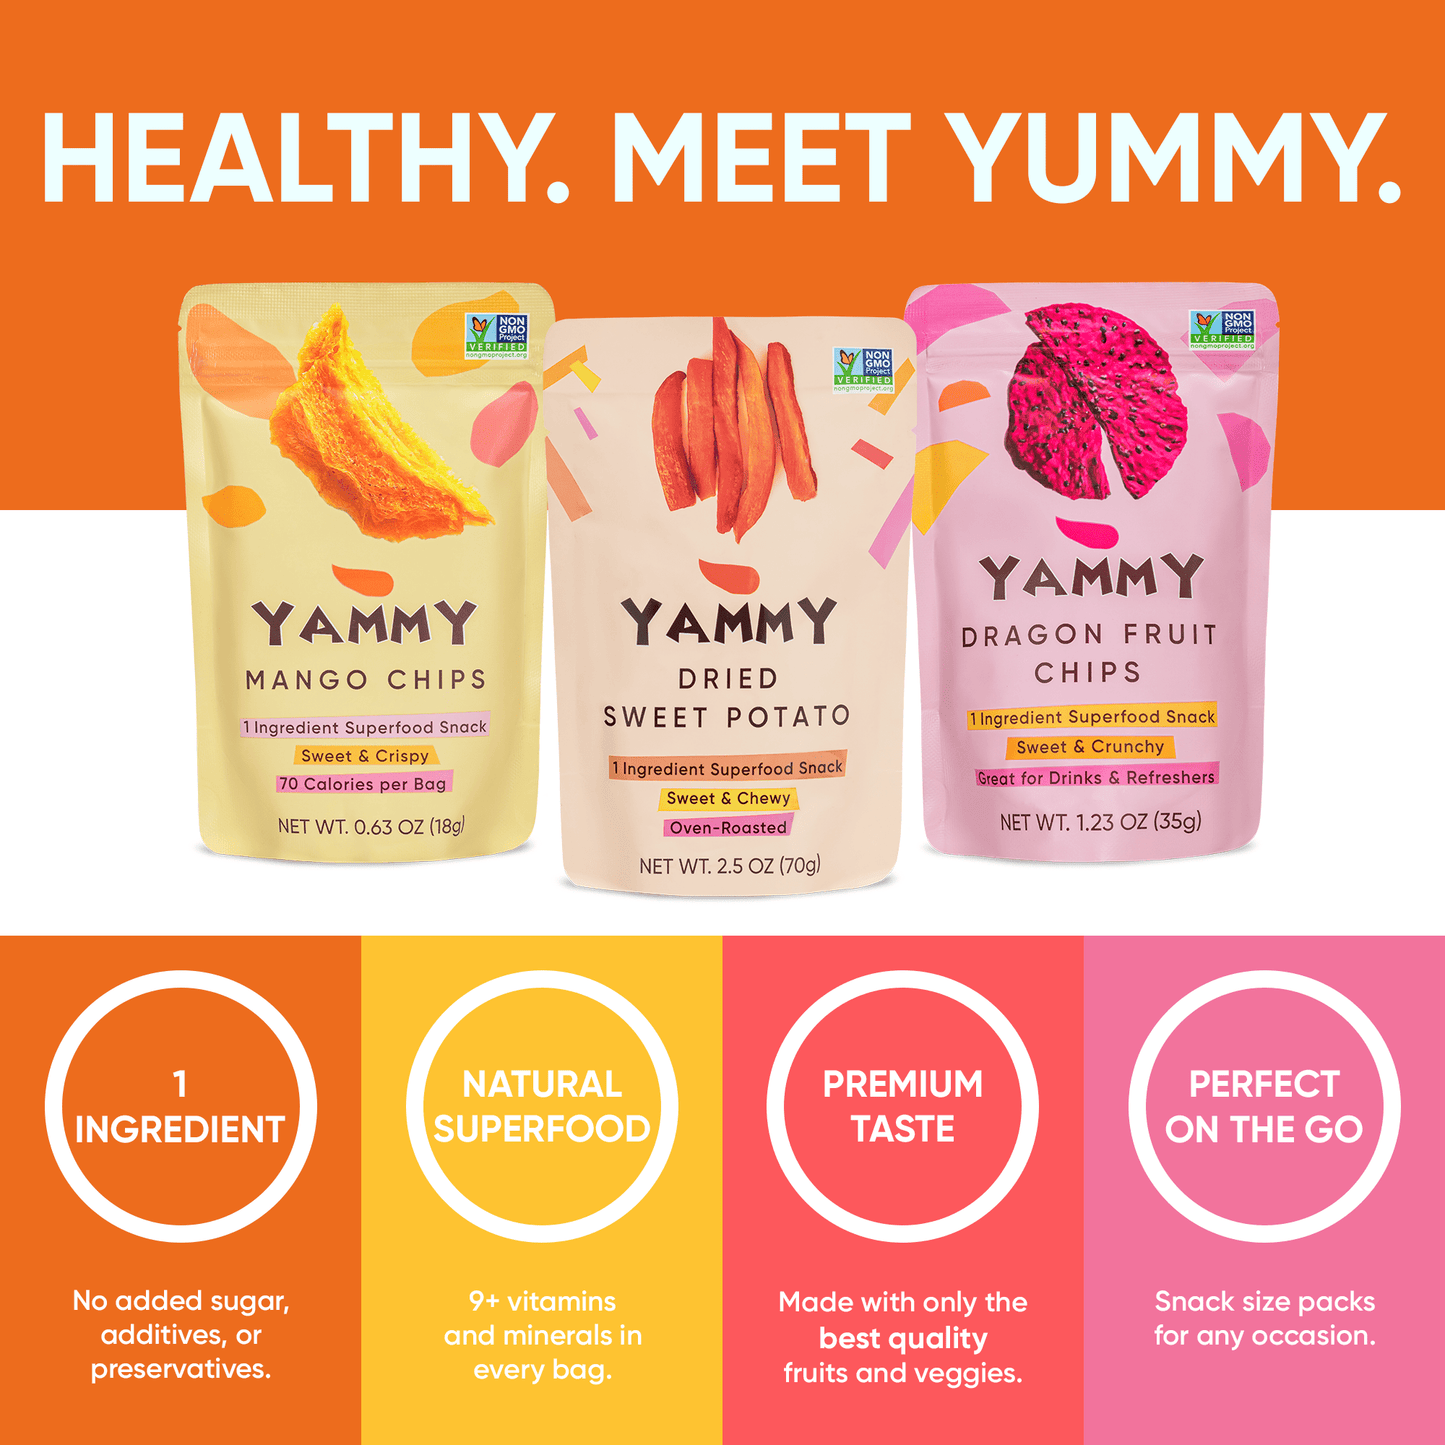 Yammy 1 Ingredient Superfood Snack Variety Pack - Yammy 1 Ingredient Superfood Snacks